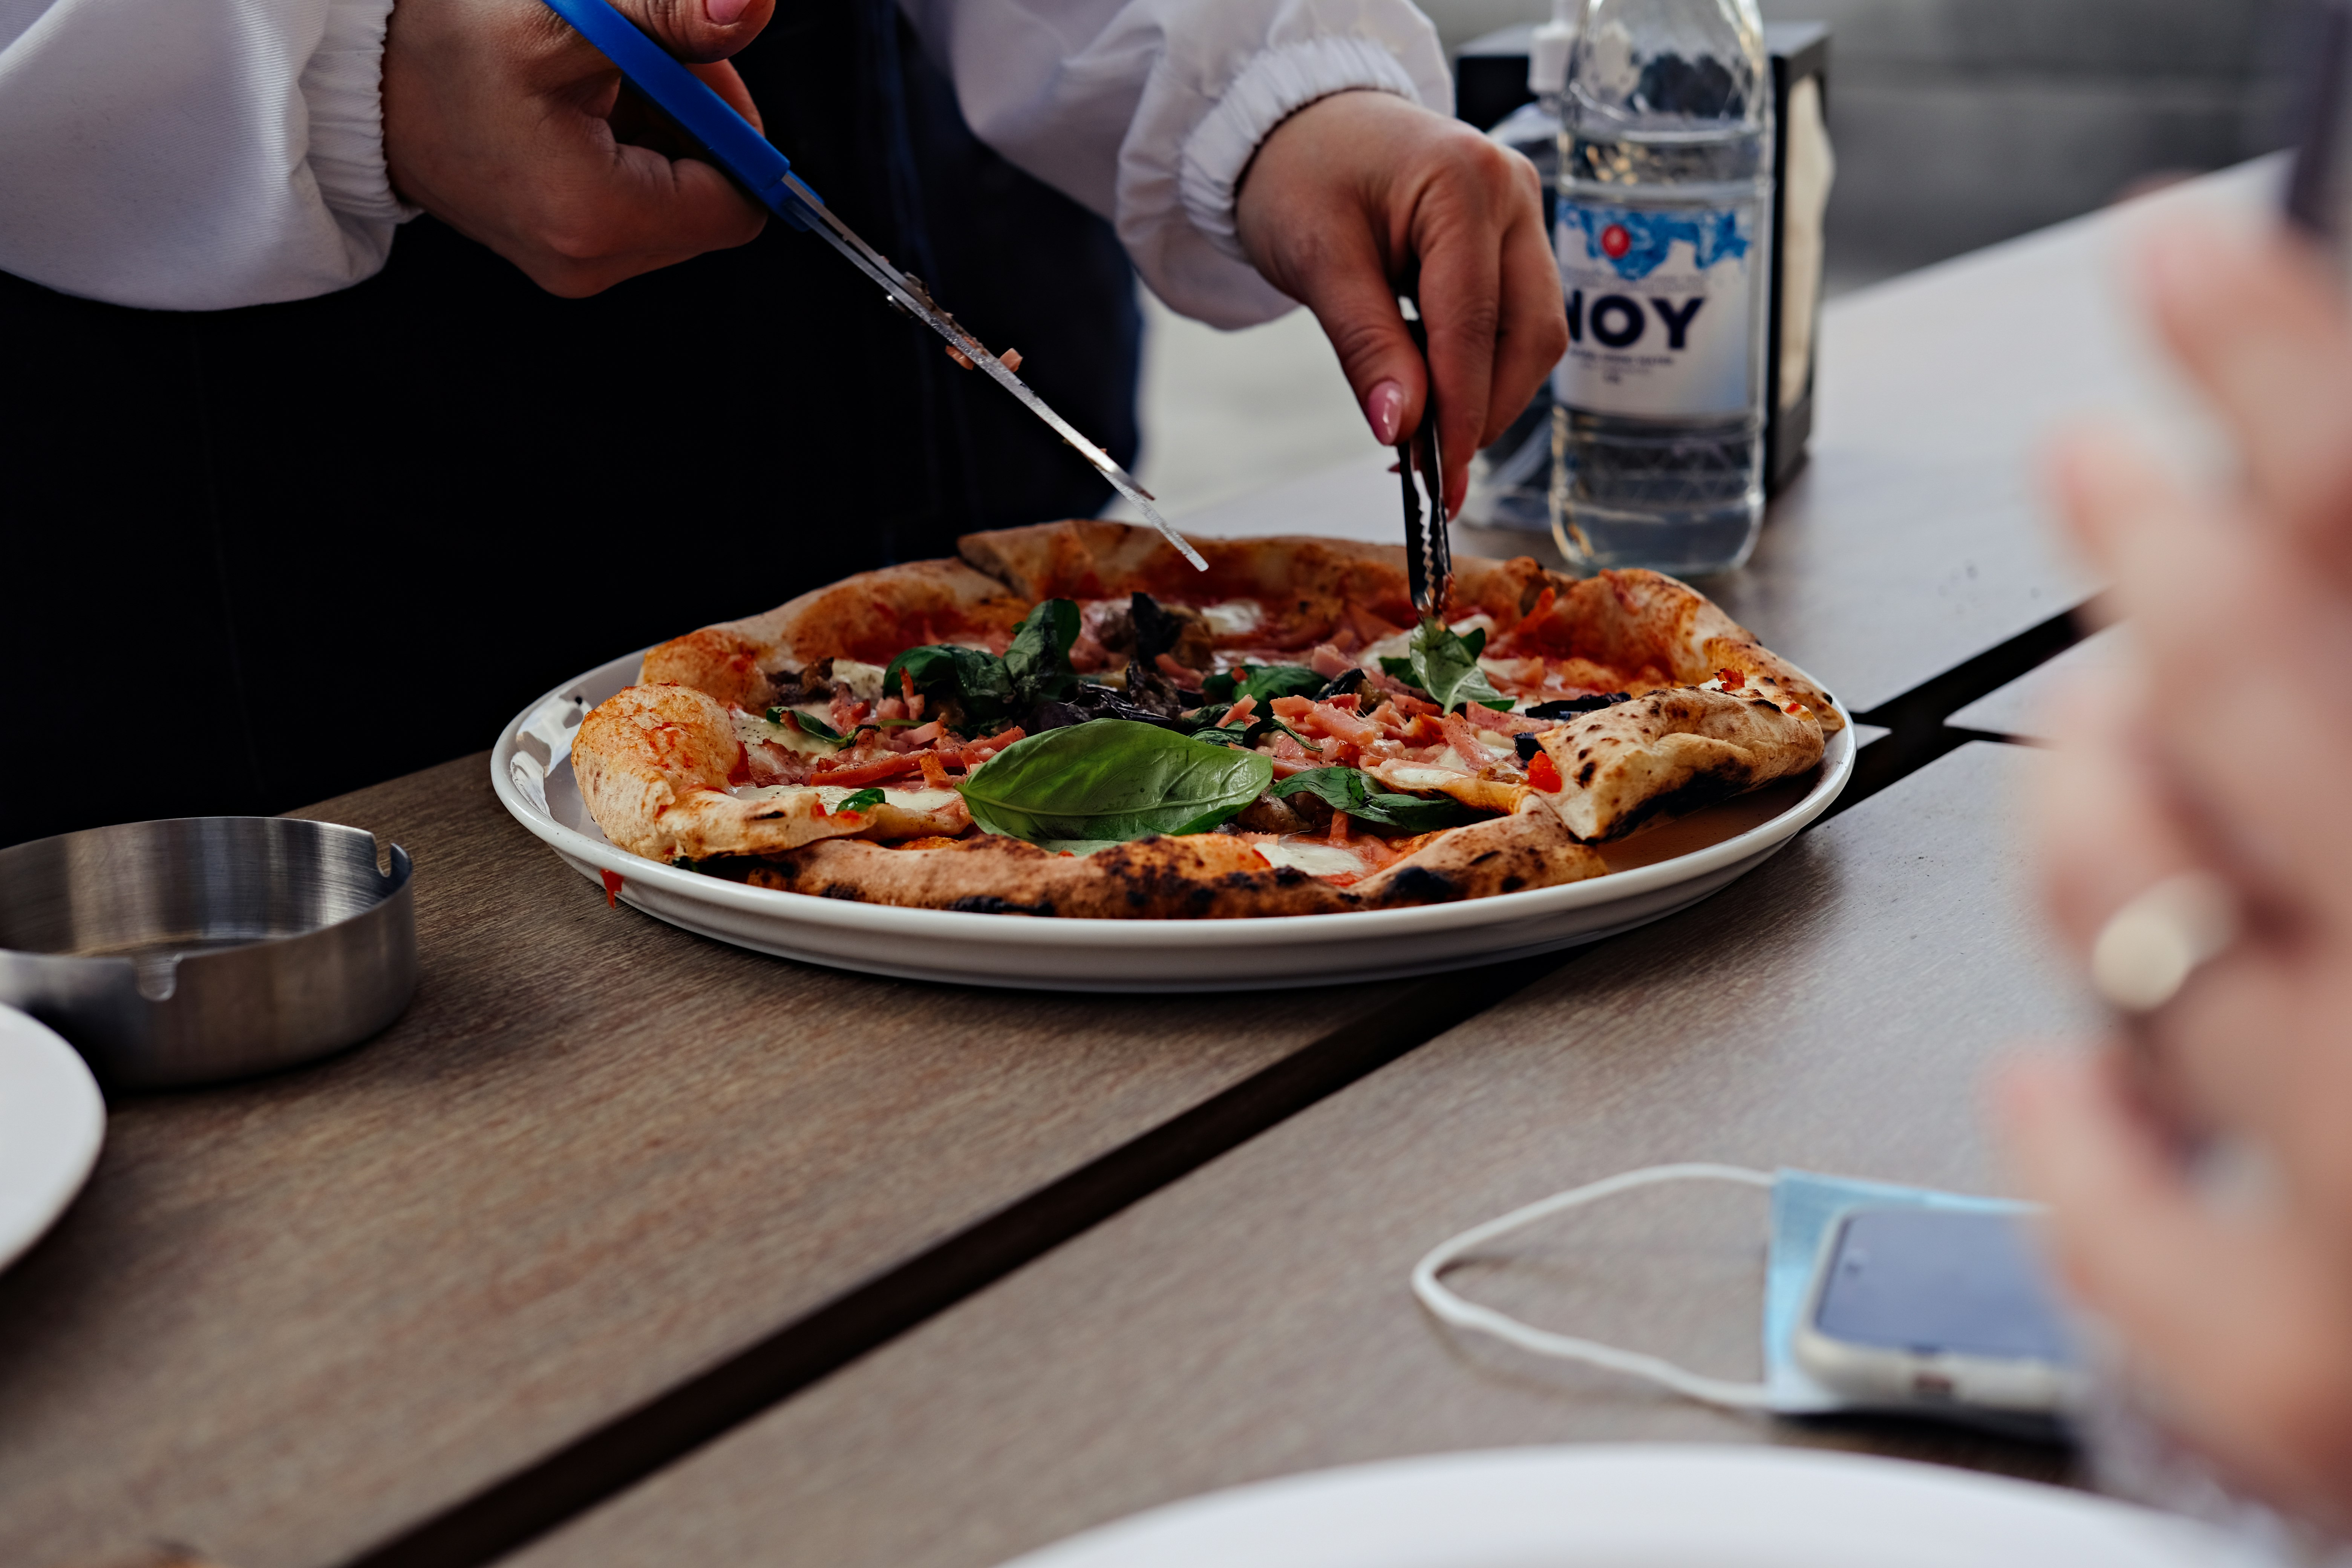 person holding blue and black chopsticks slicing pizza on white ceramic plate